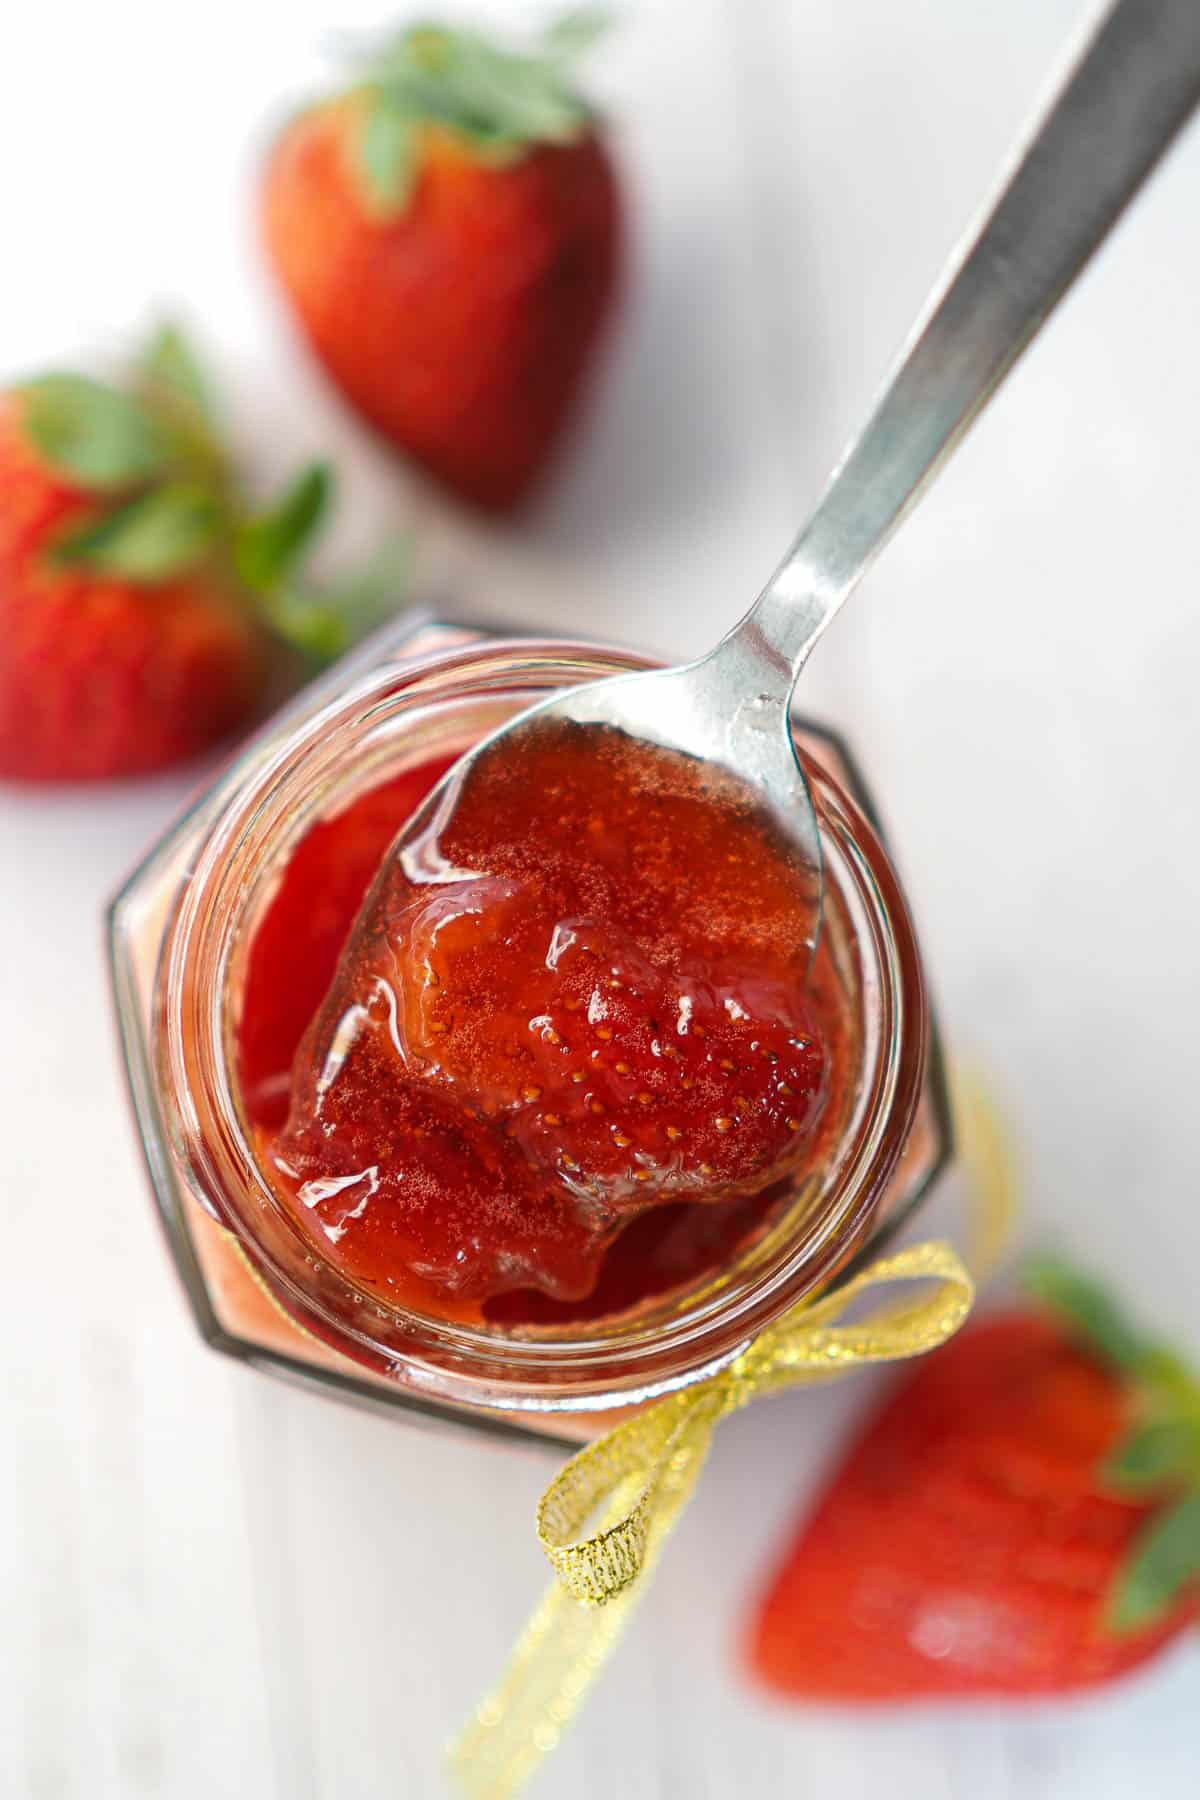 Top view of a jar of strawberry filling. A spoon is on top, filled with the filling